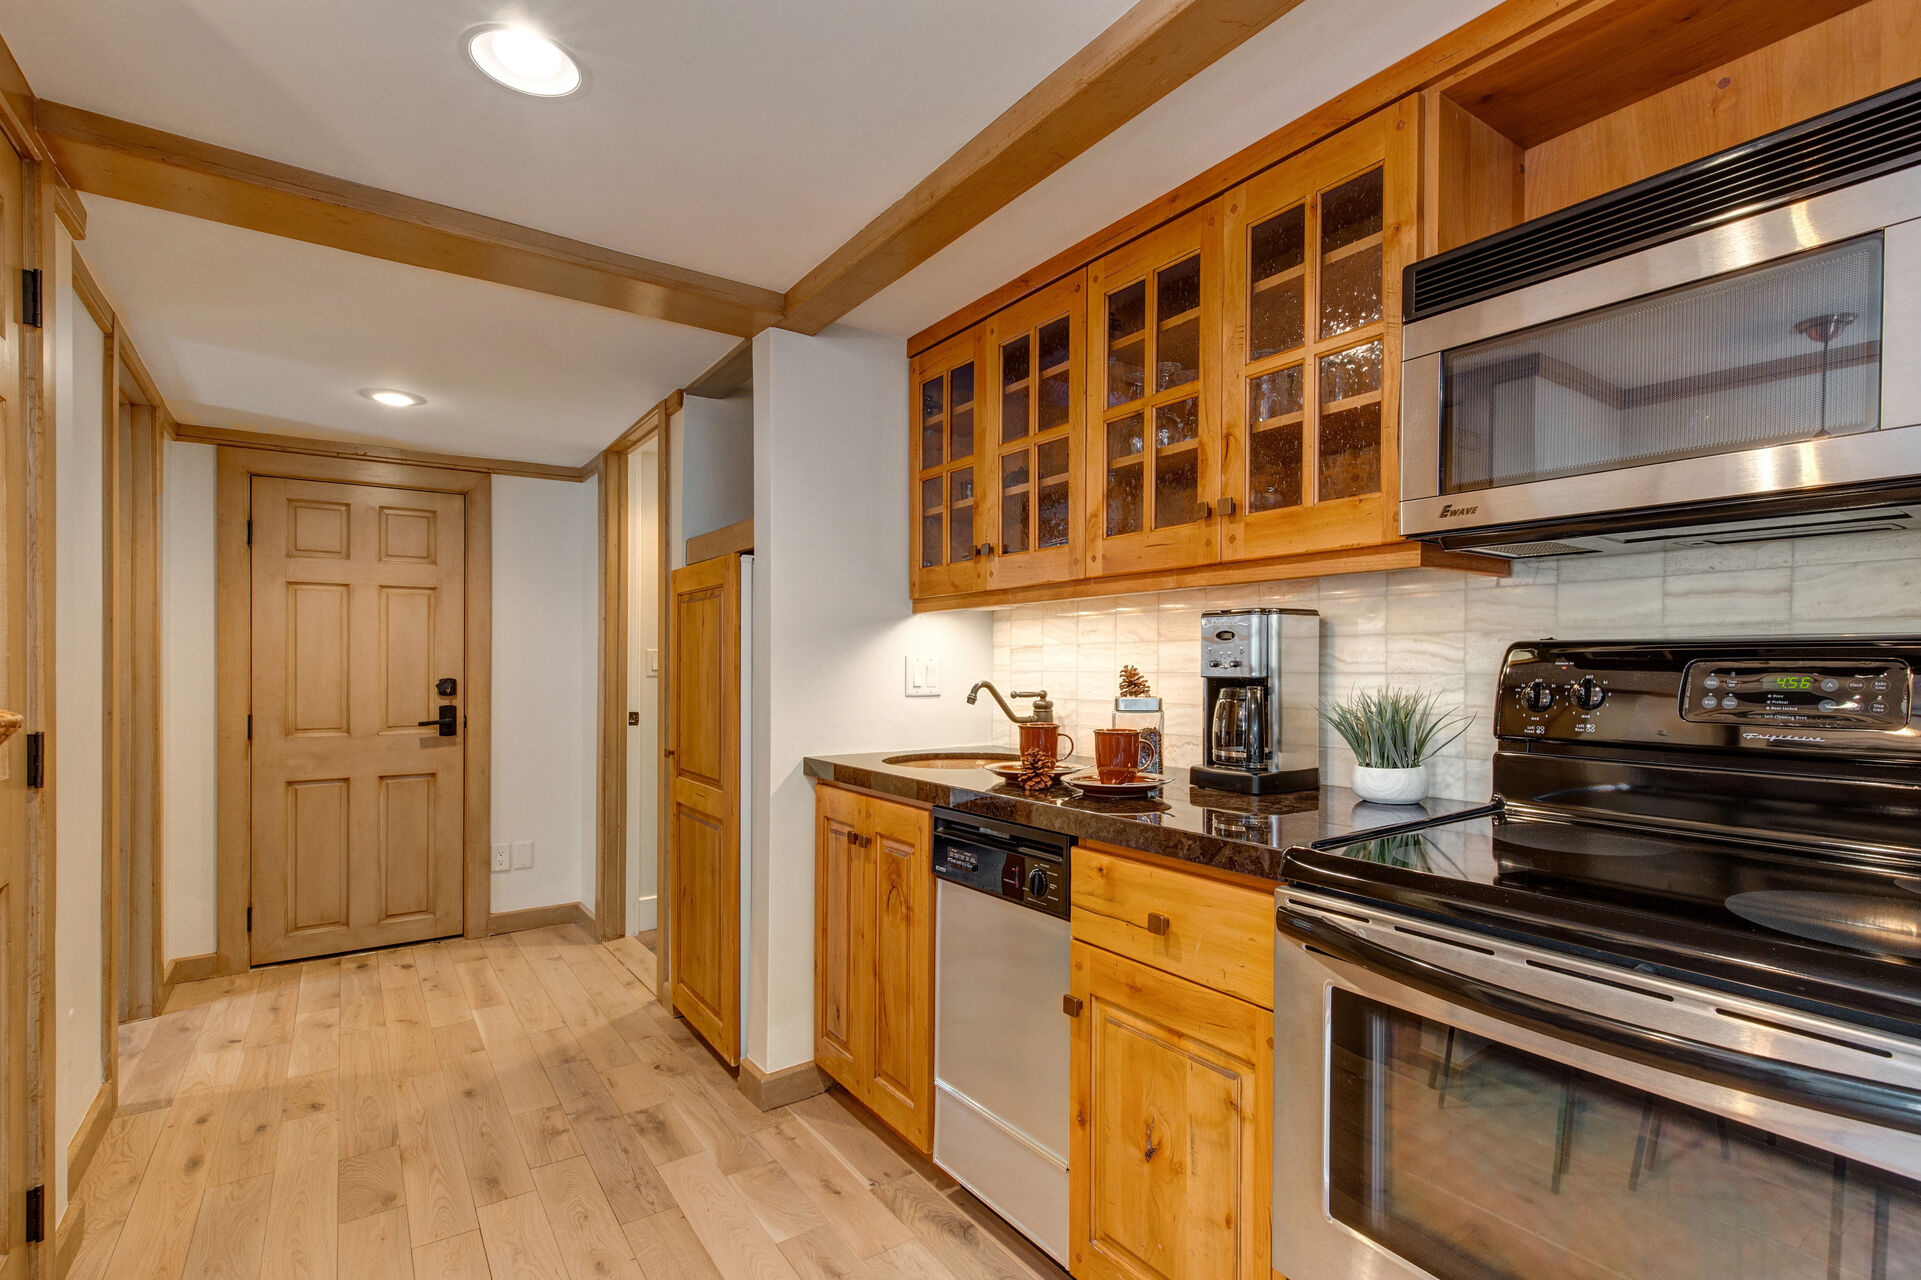 Lower Level Kitchenette with bar seating for two, stainless steel appliances and hot tub patio access